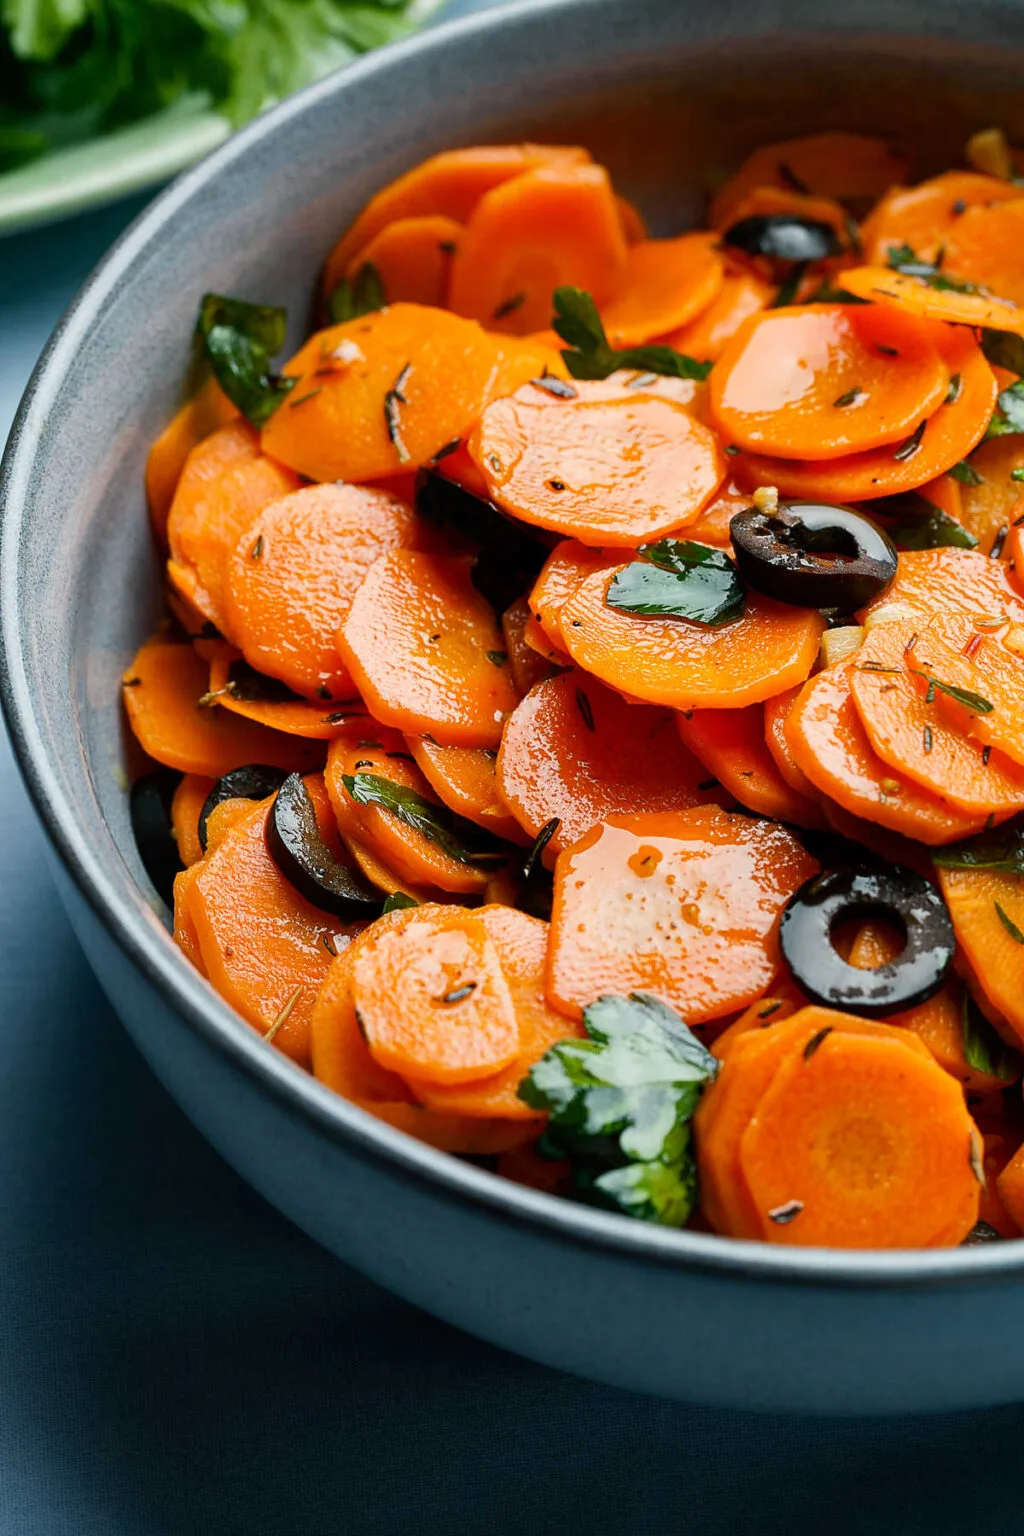 Spicy Moroccan Carrot Salad